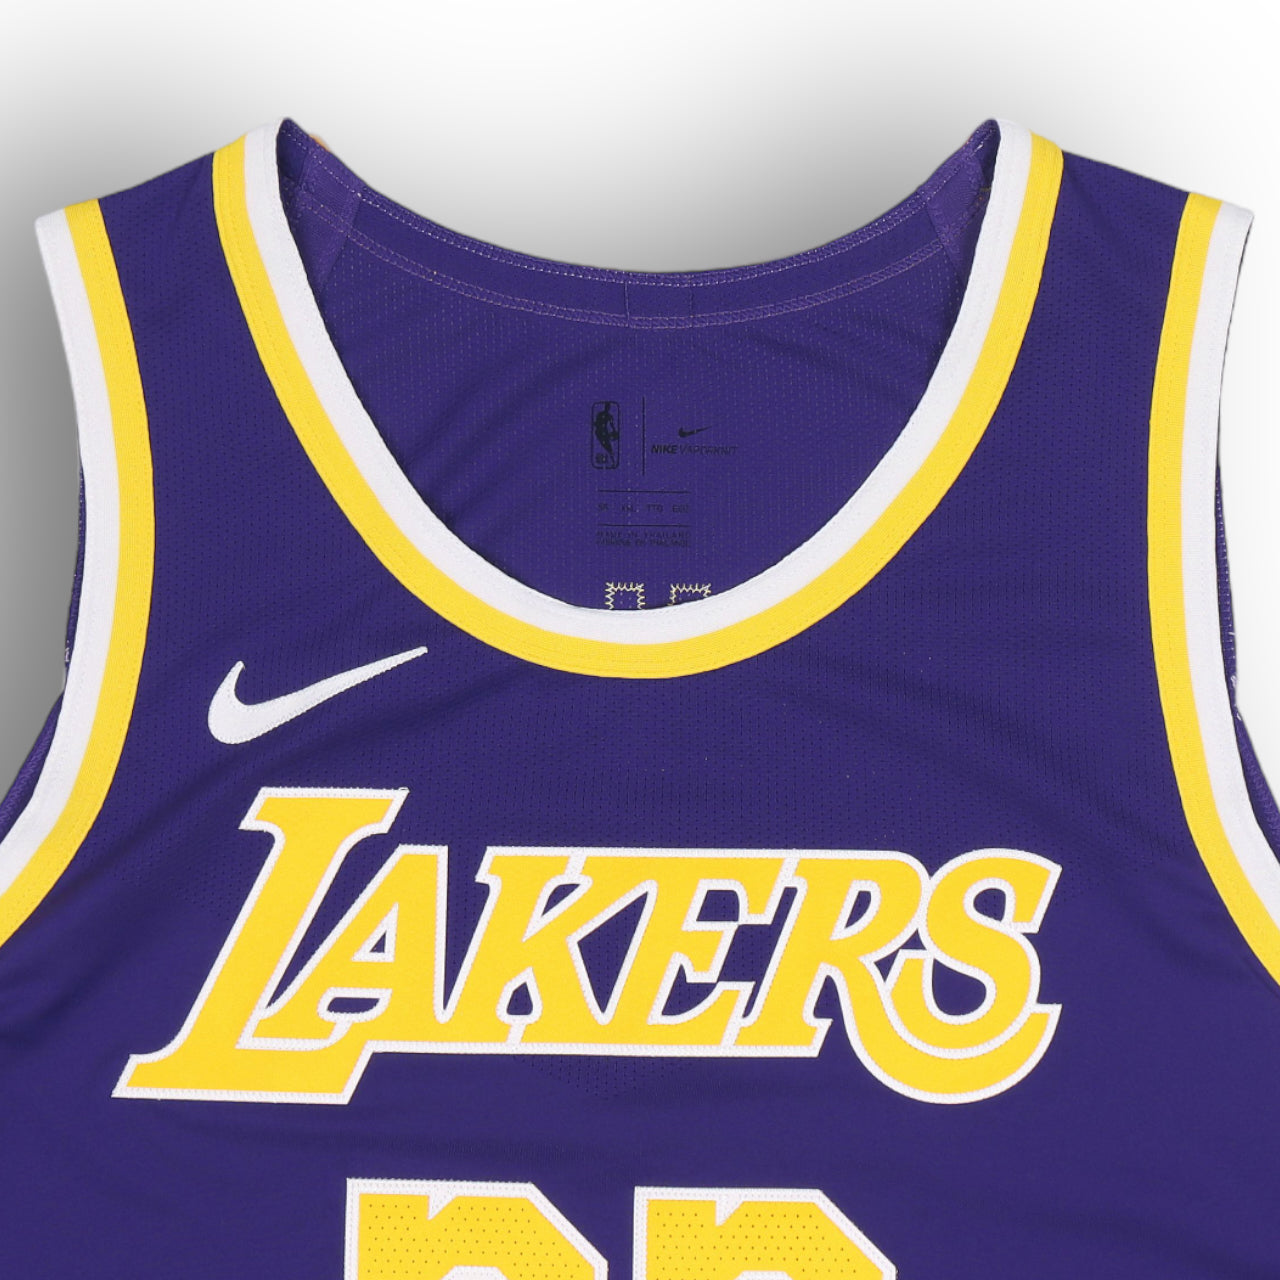 LeBron James Los Angeles Lakers 2020 Statement Edition Nike Authentic Jersey - Purple #23 - Hoop Jersey Store